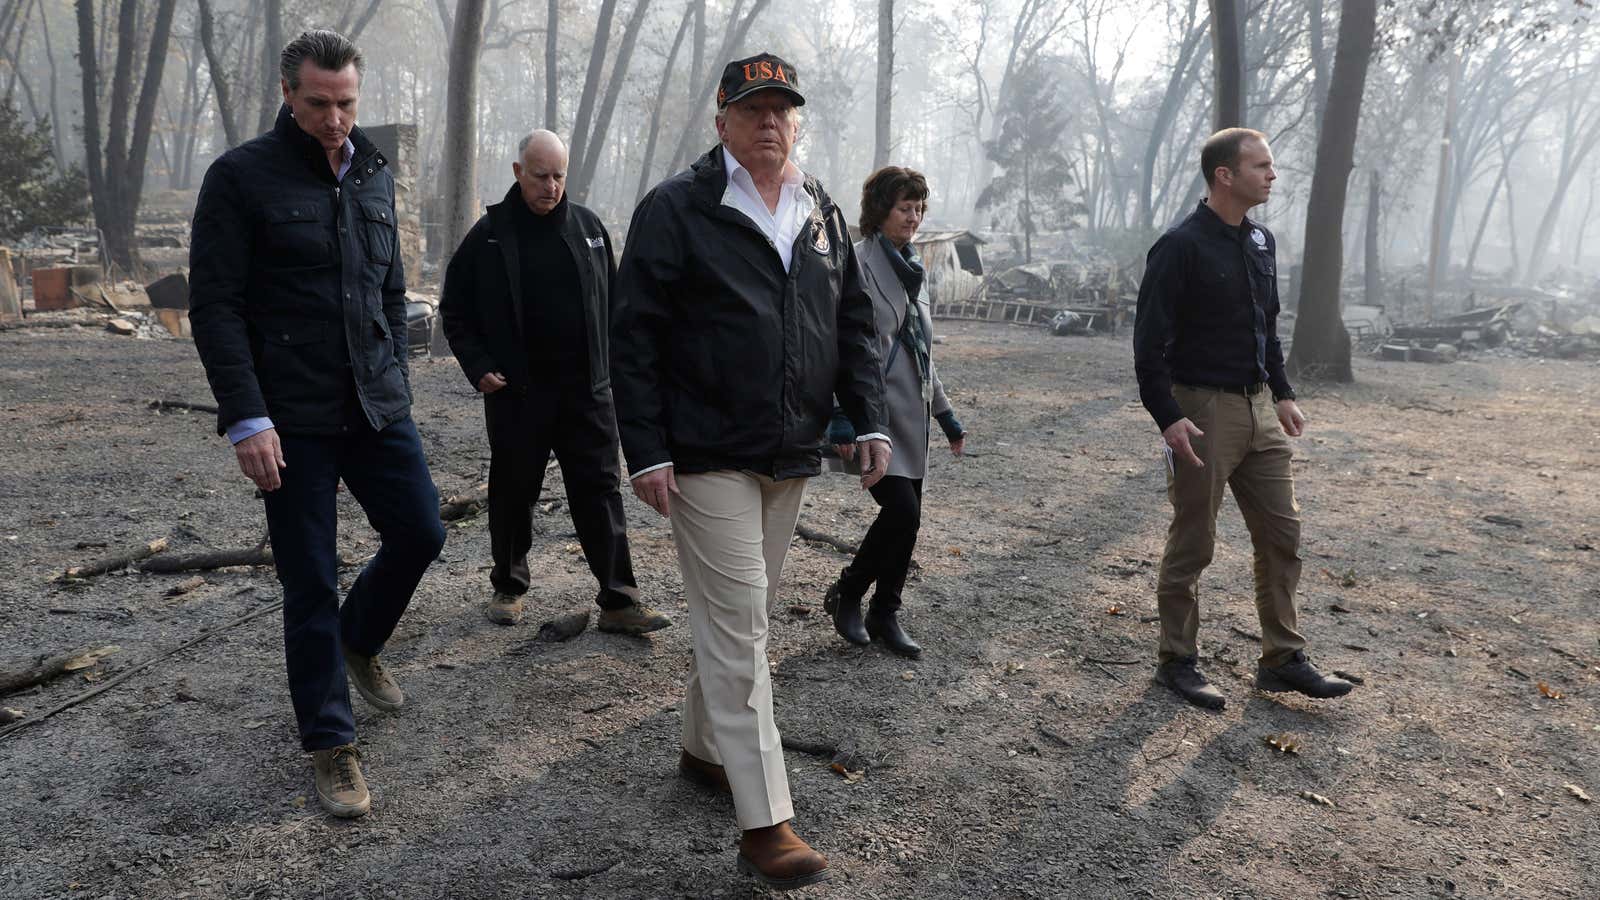 Donald Trump tours Paradise, California after the wildfires.